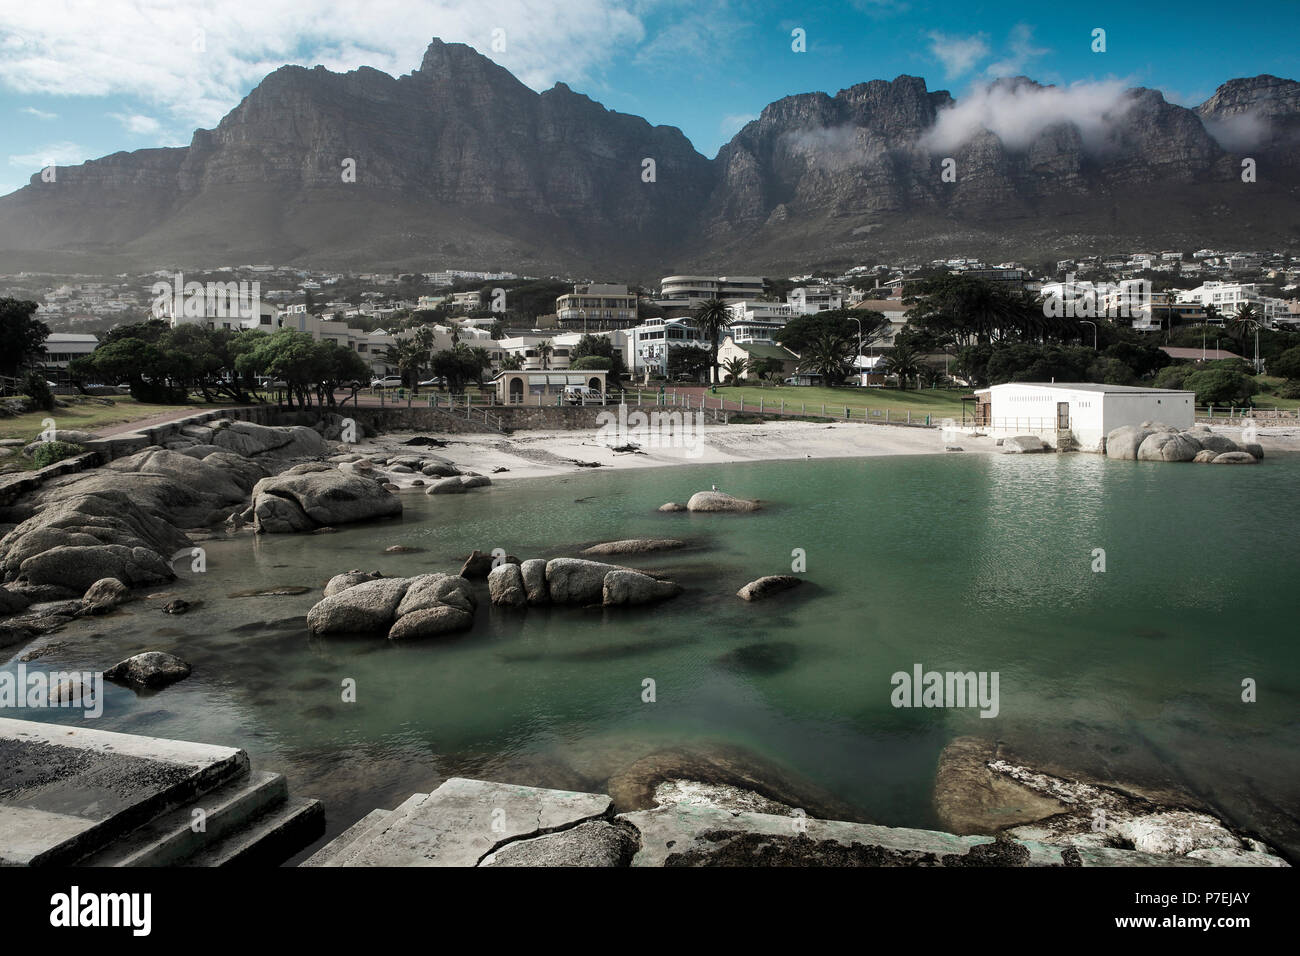 Camps Bay tidal pool and beach in Cape Town, South Africa Stock Photo